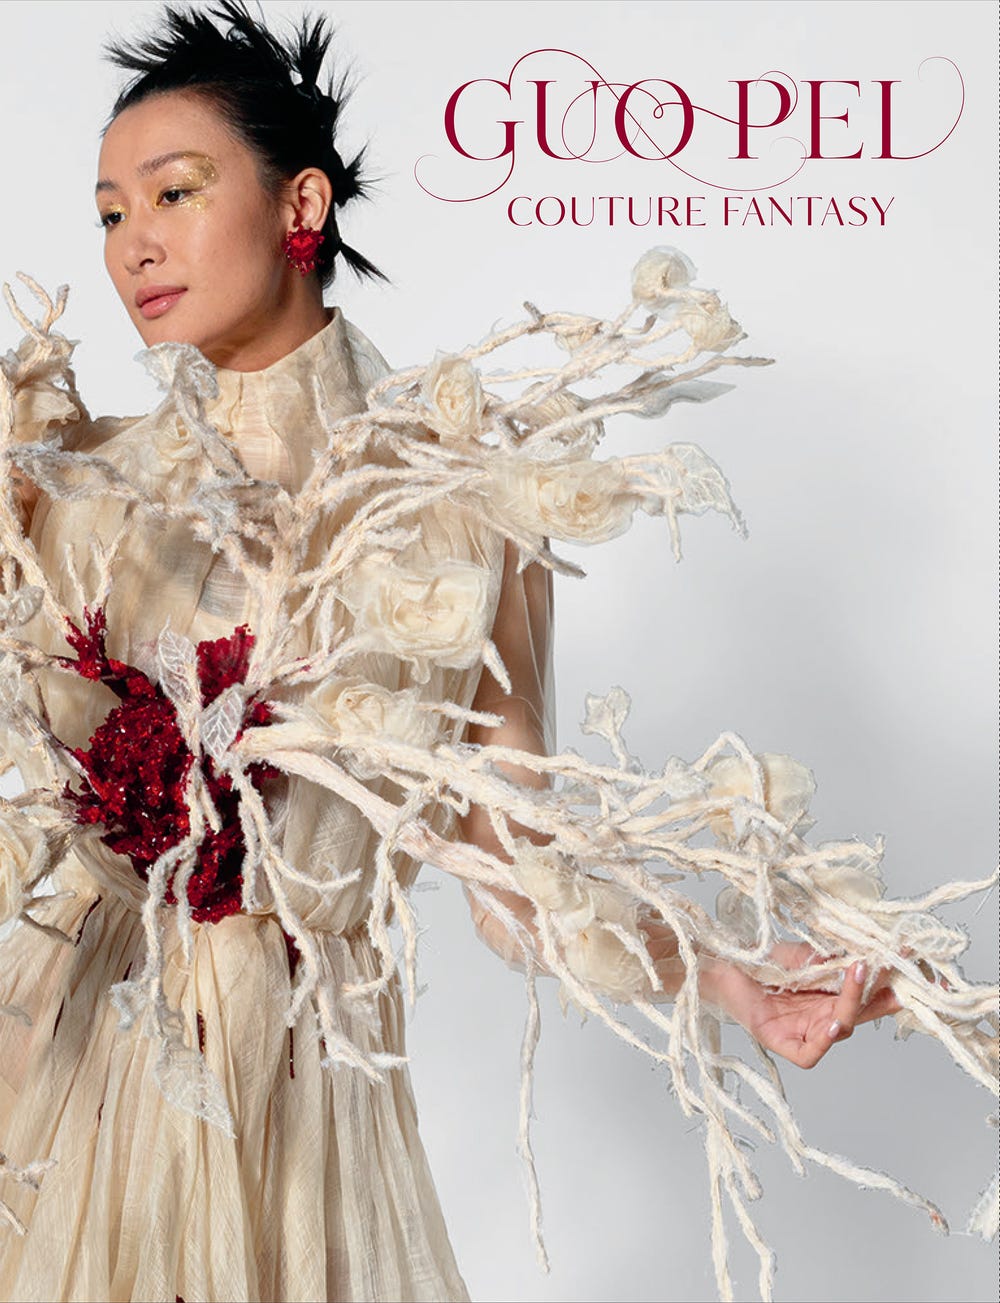 Book jacket featuring model in intricate white dress with "Guo Pei Couture Fantasy" text